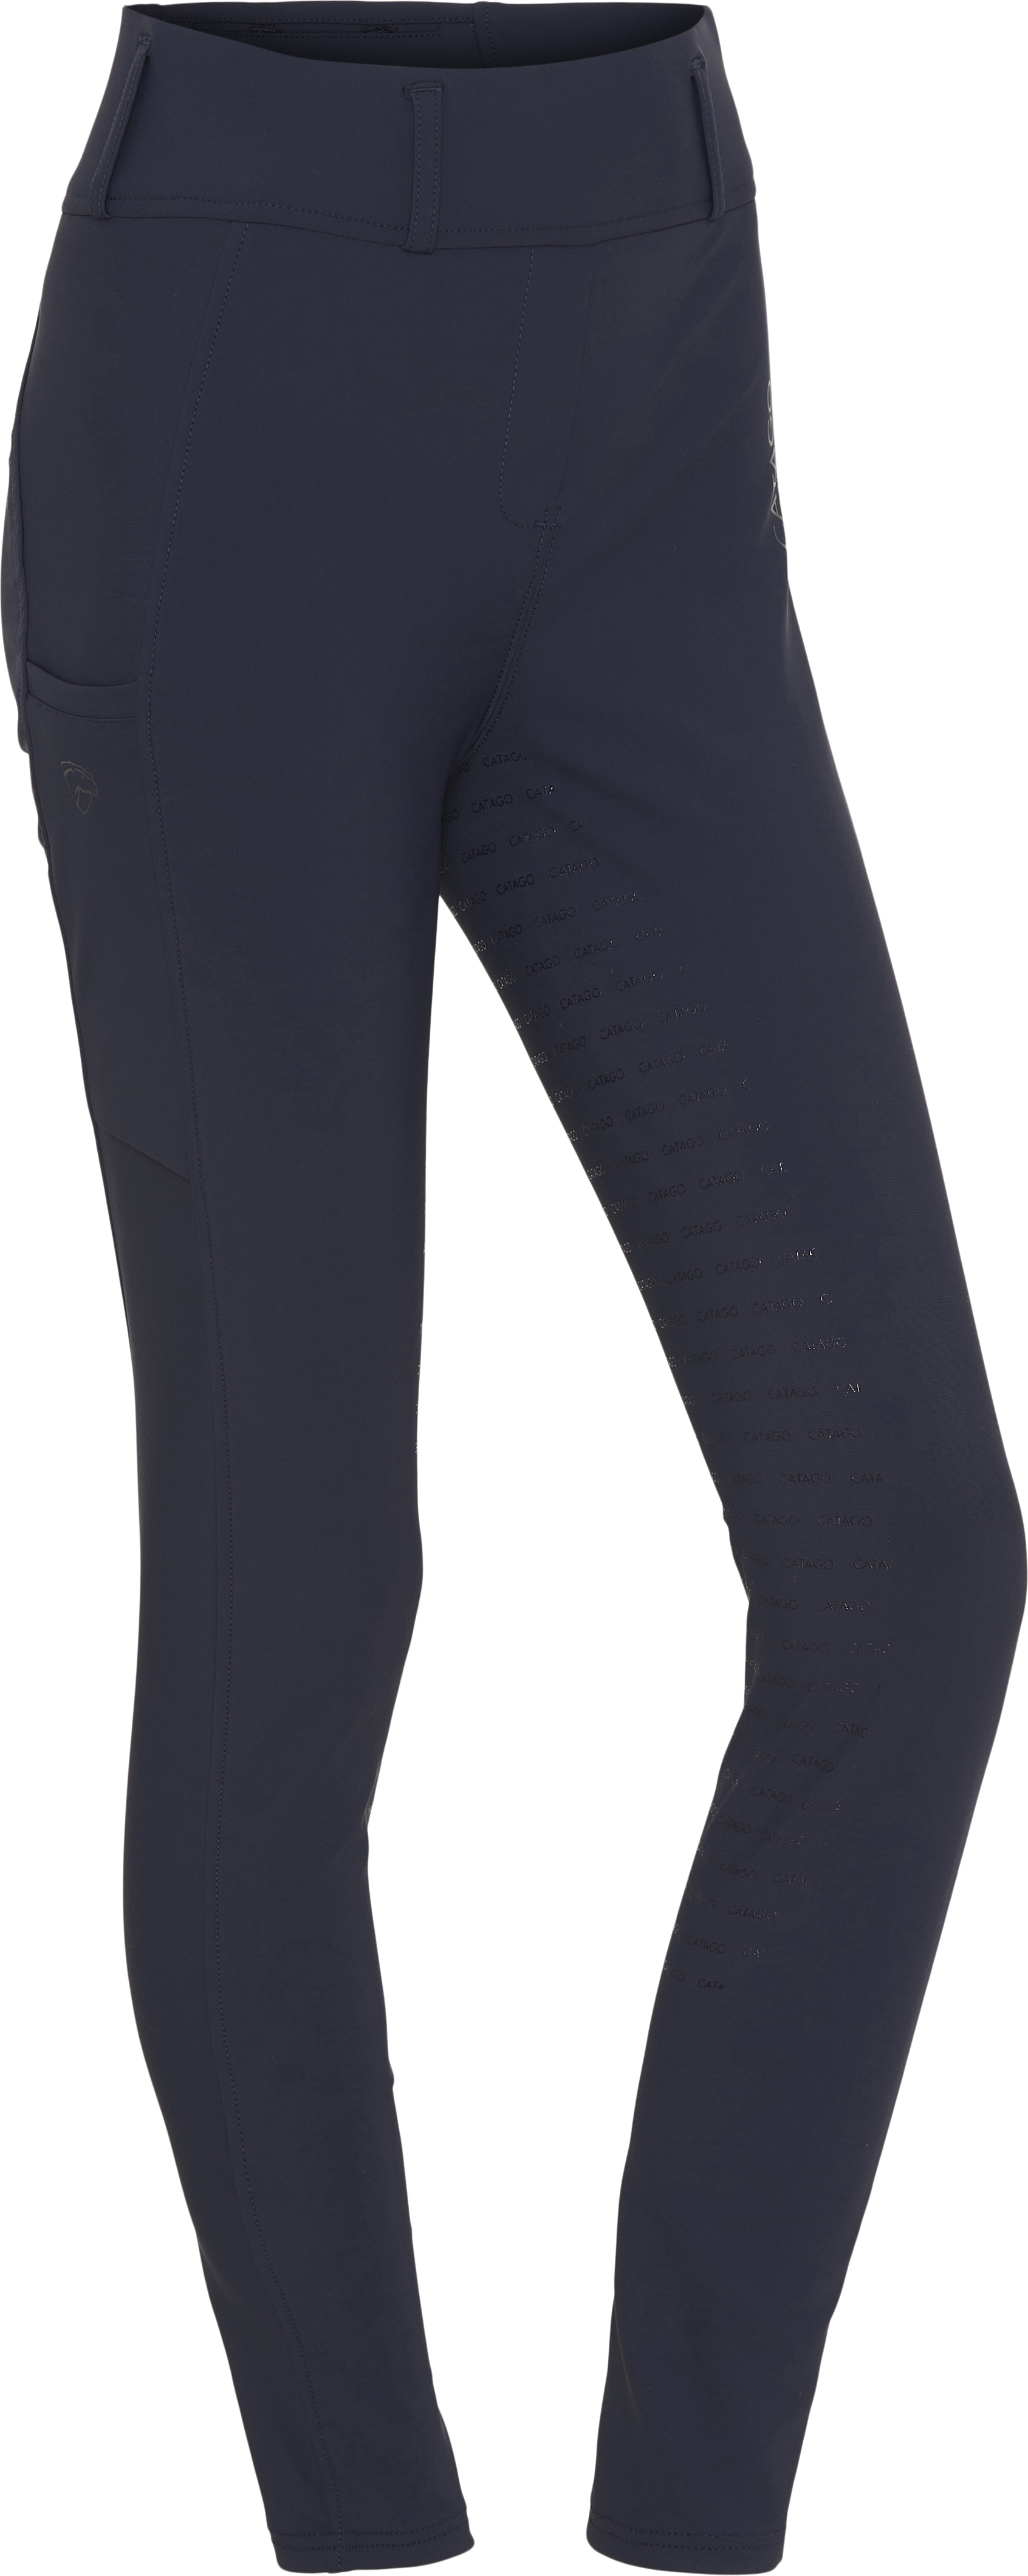 CATAGO River Tights Fullgrip With Belt Loops - Navy (XS), Catago